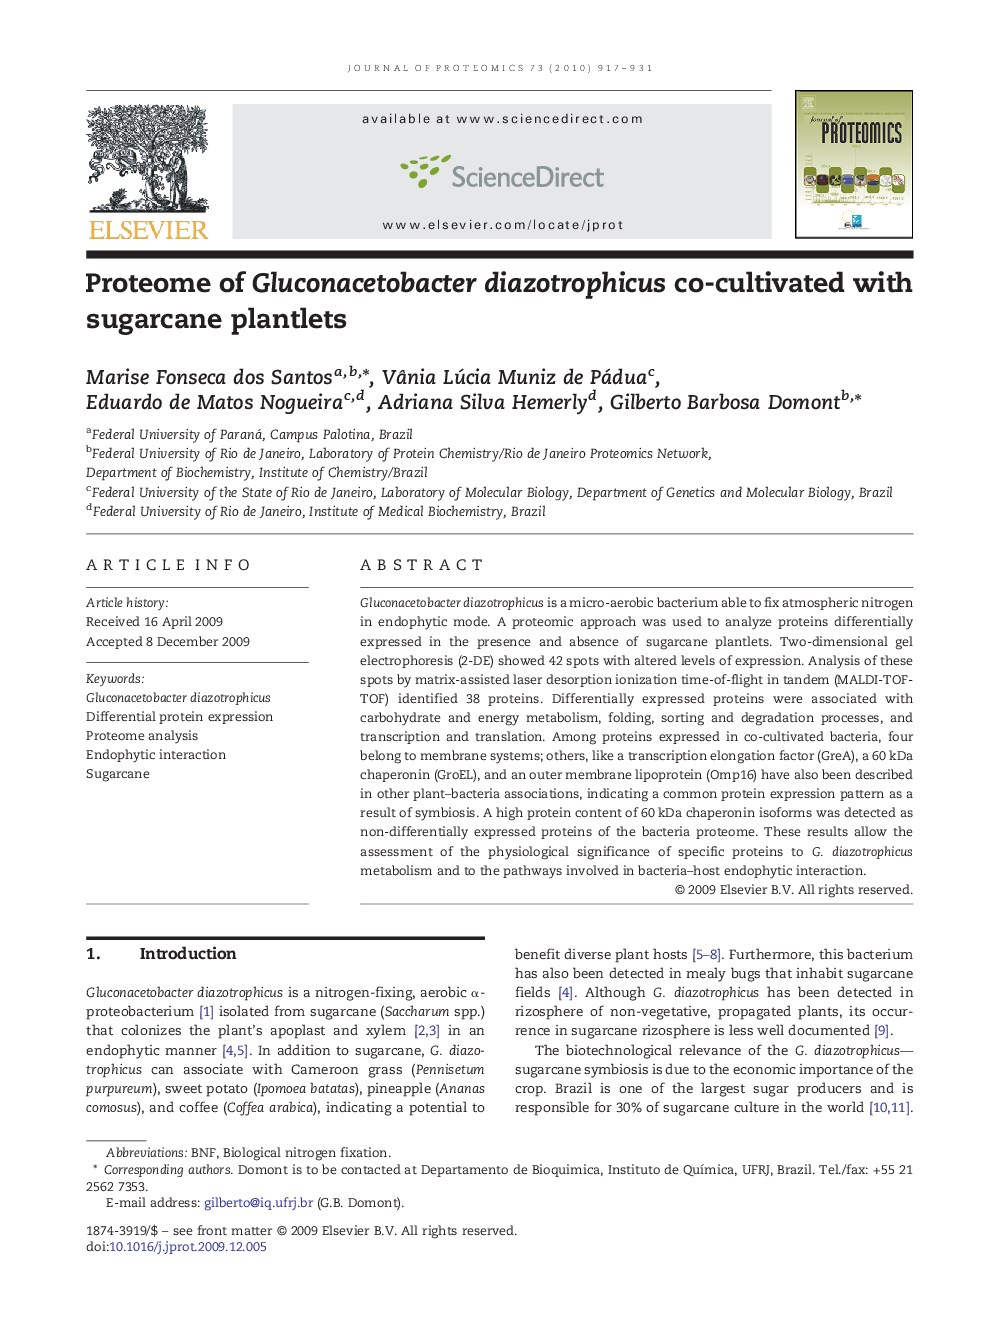 Proteome of Gluconacetobacter diazotrophicus co-cultivated with sugarcane plantlets